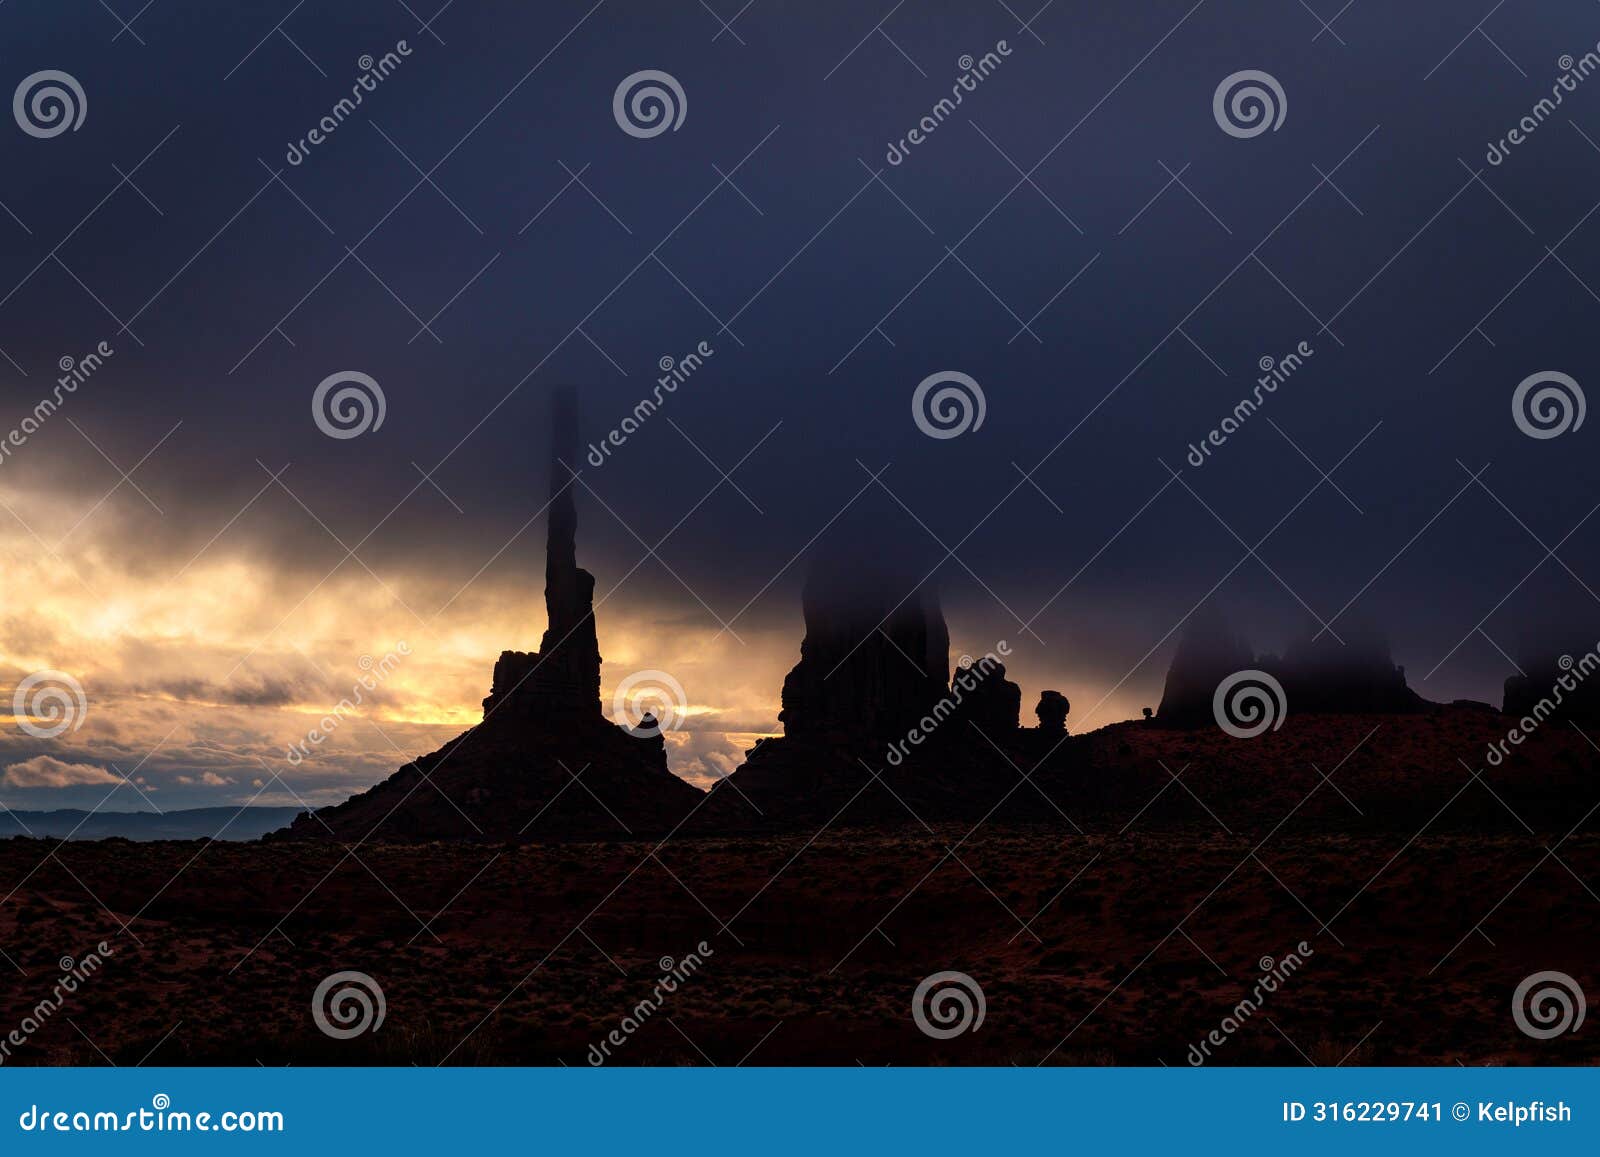 totem pole in monument valley during morning storm